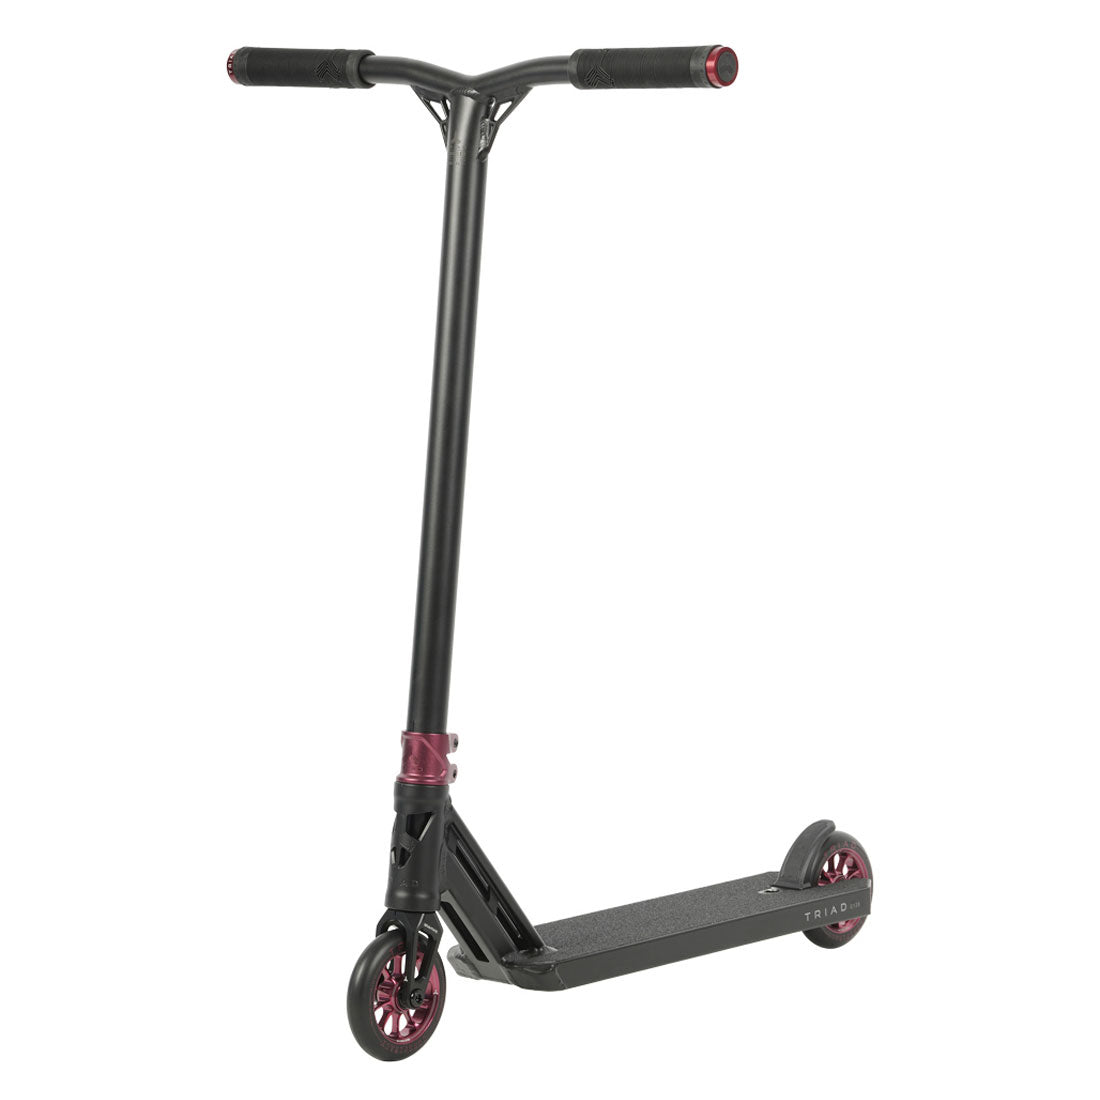 Triad C120 Rabid Complete Scooter - Black/Red Scooter Completes Trick